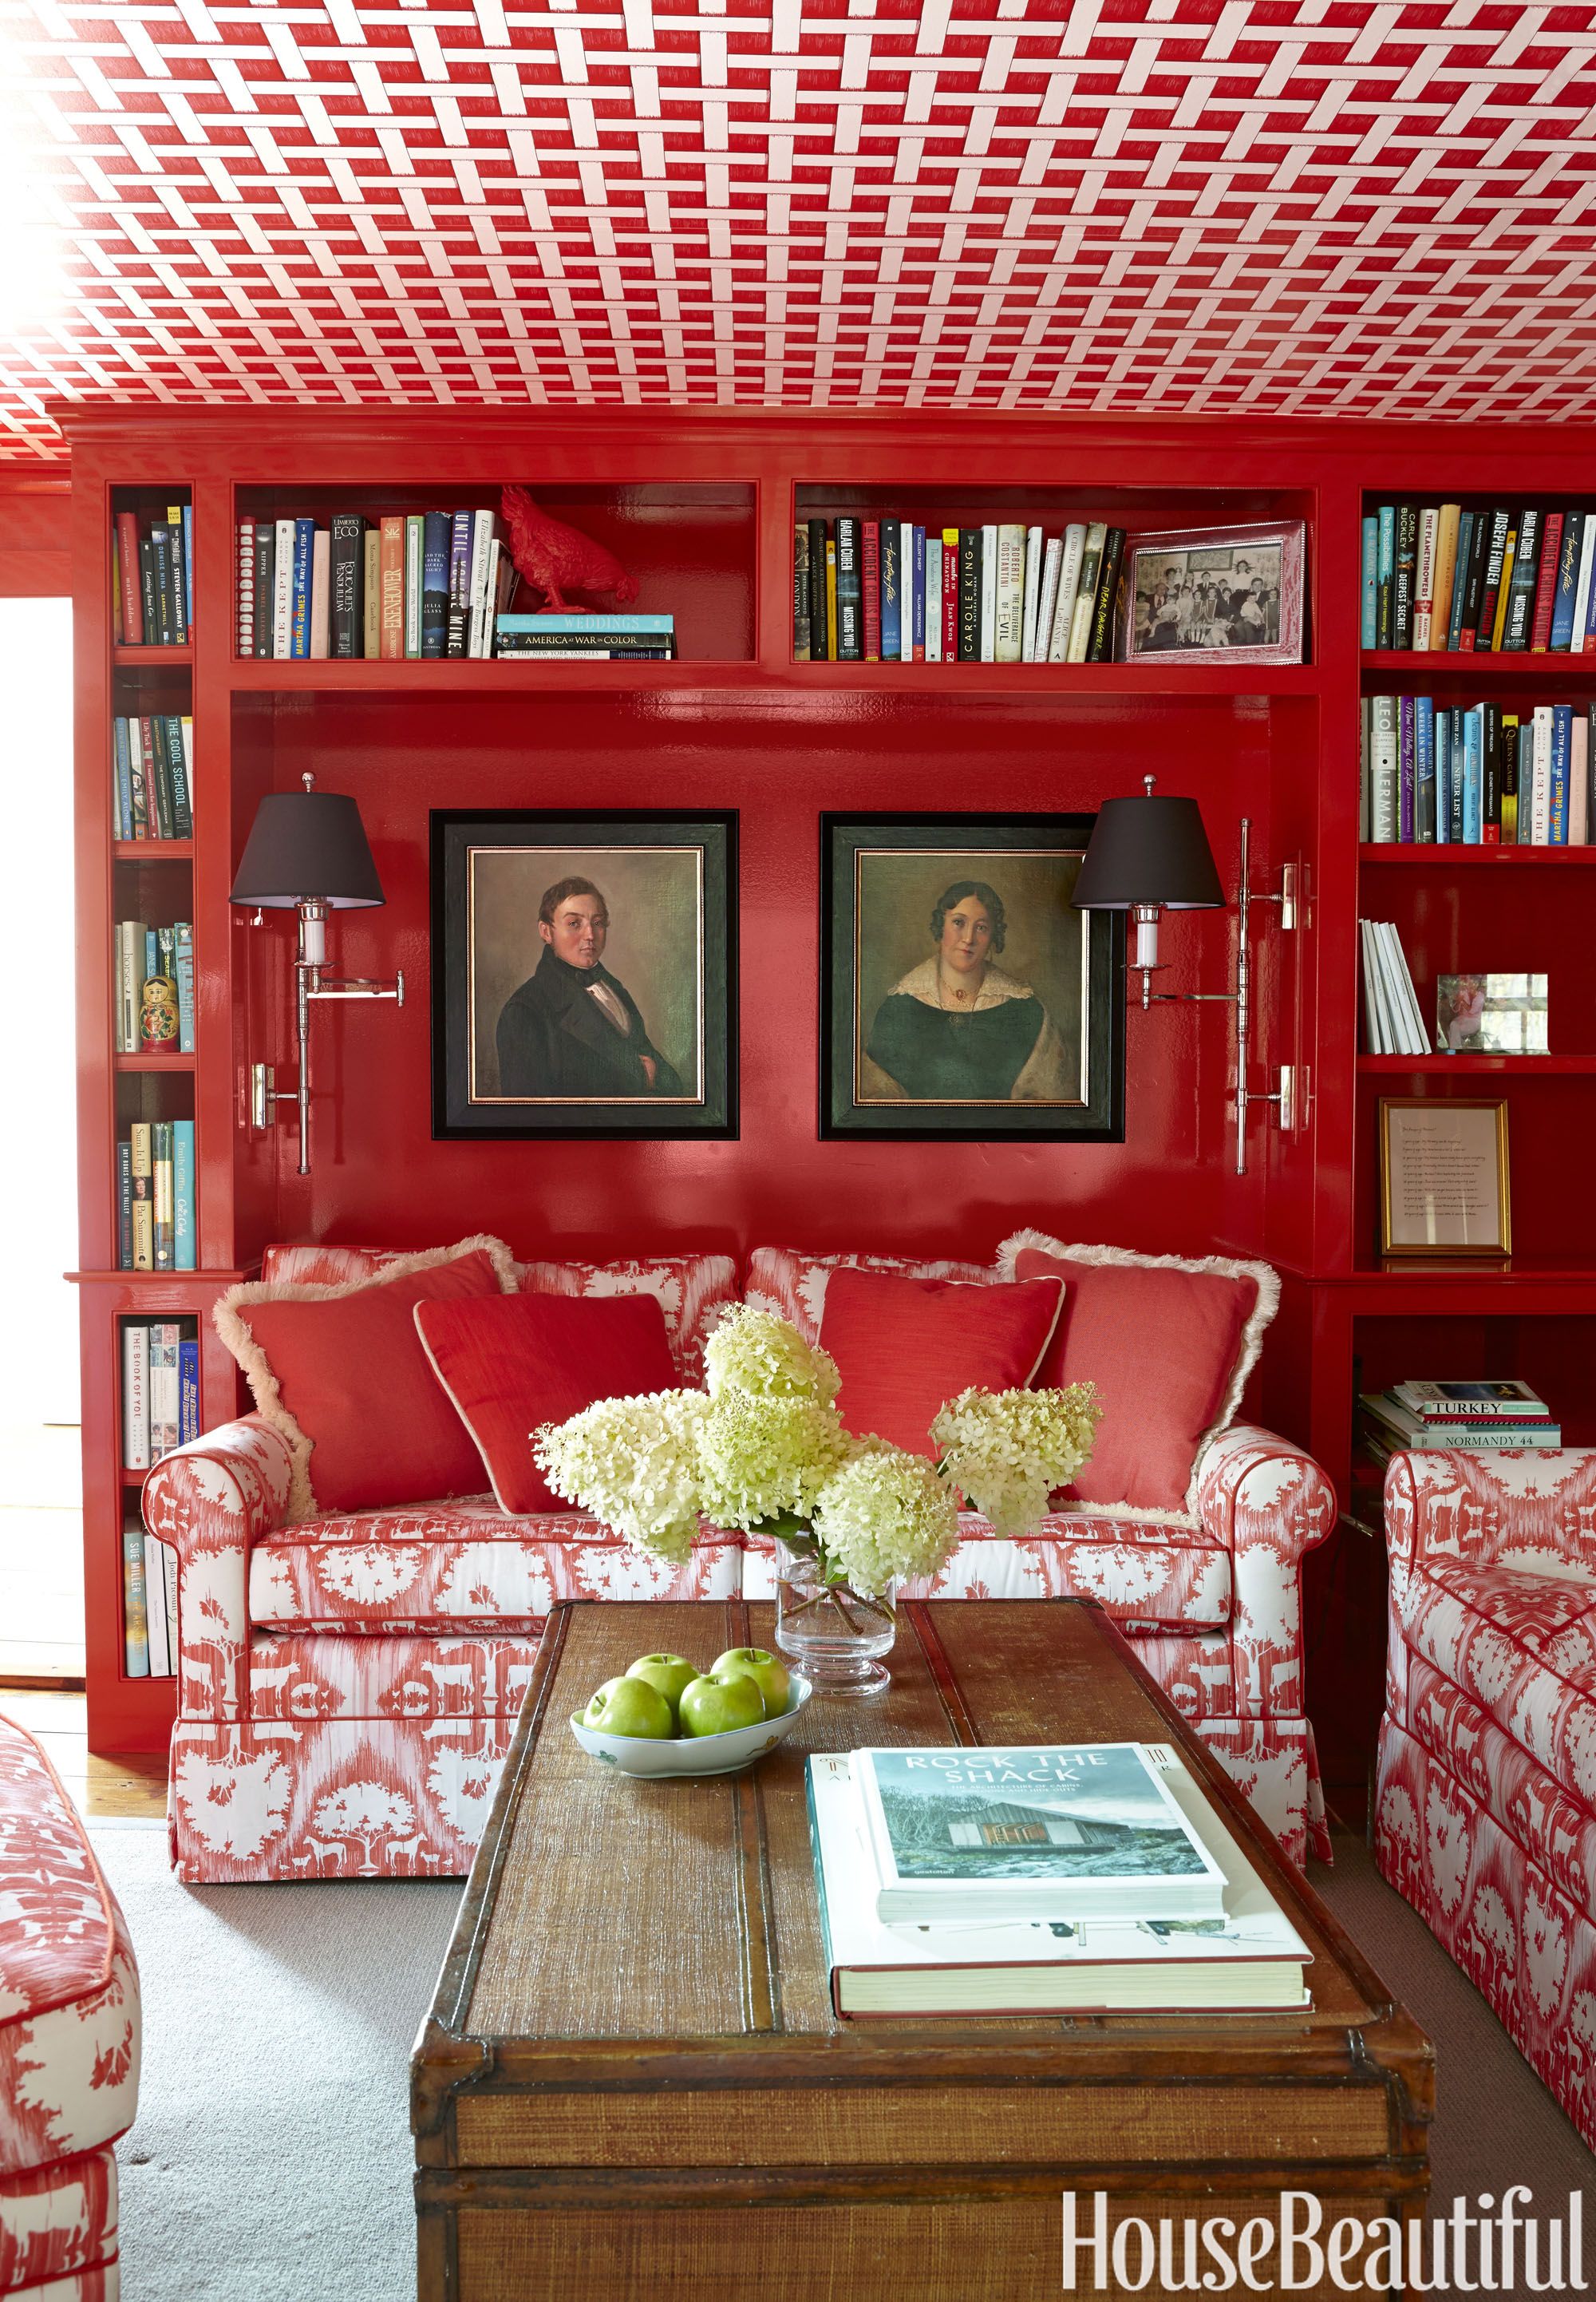 Pure Red (8093) House Wall Painting Colour